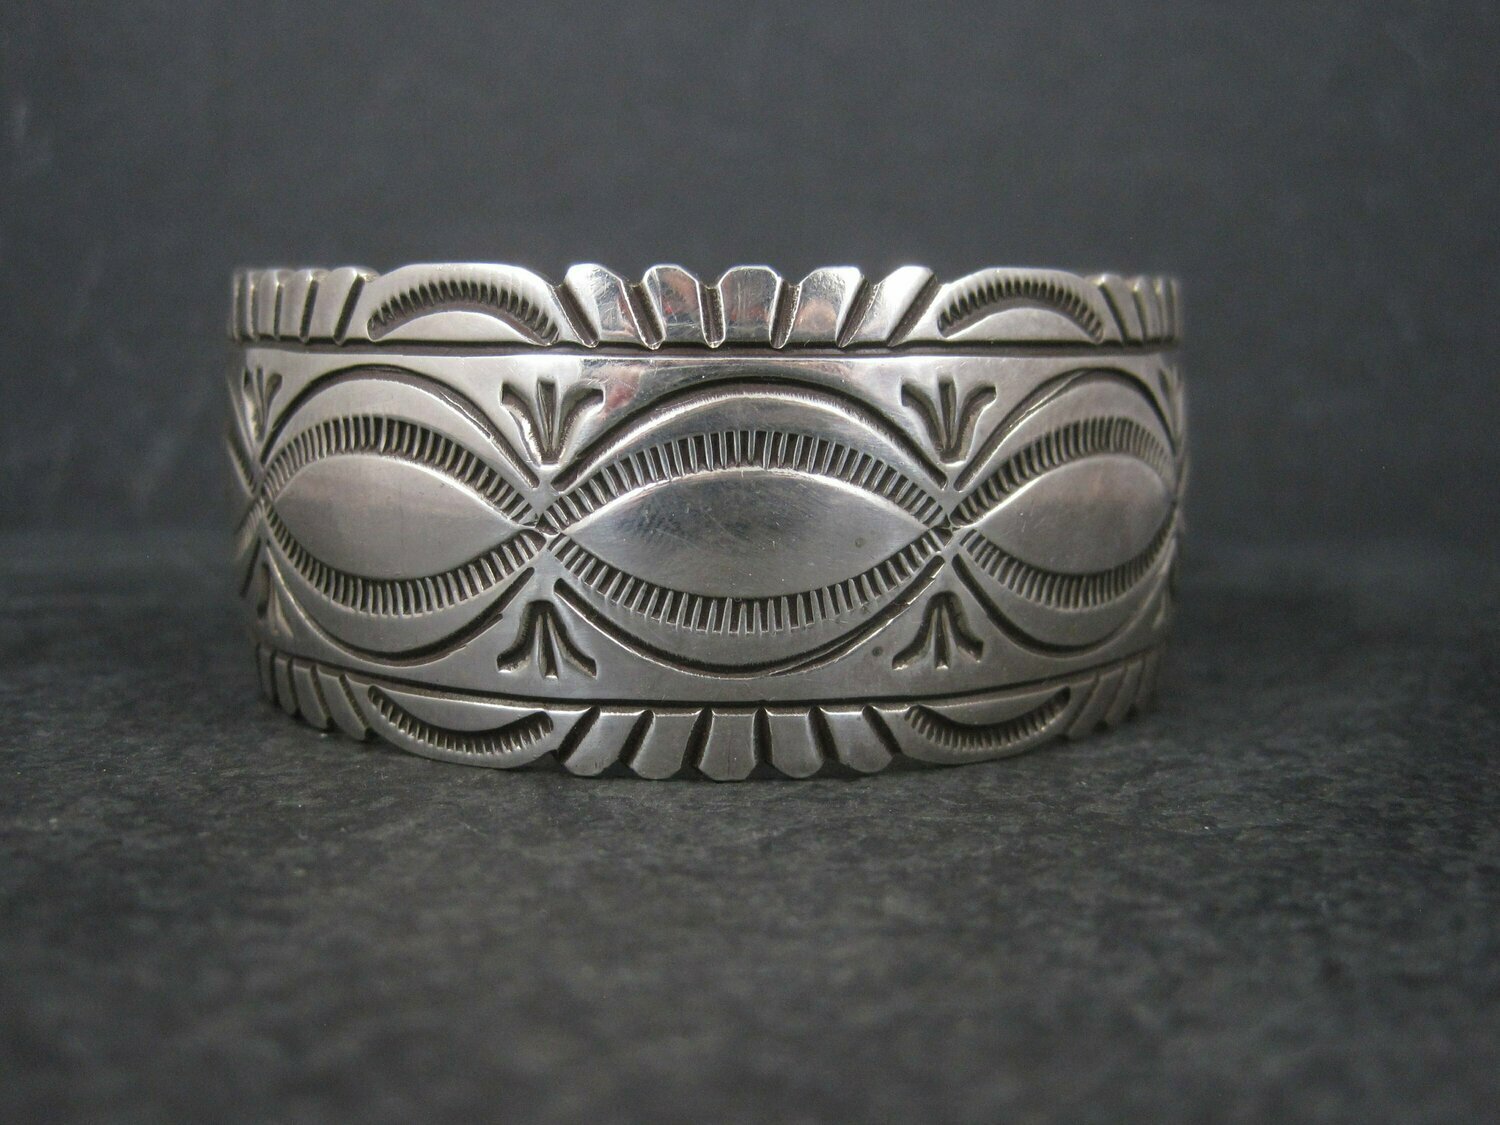 Heavy Vintage Native American Cuff Bracelet 6.75 Inches